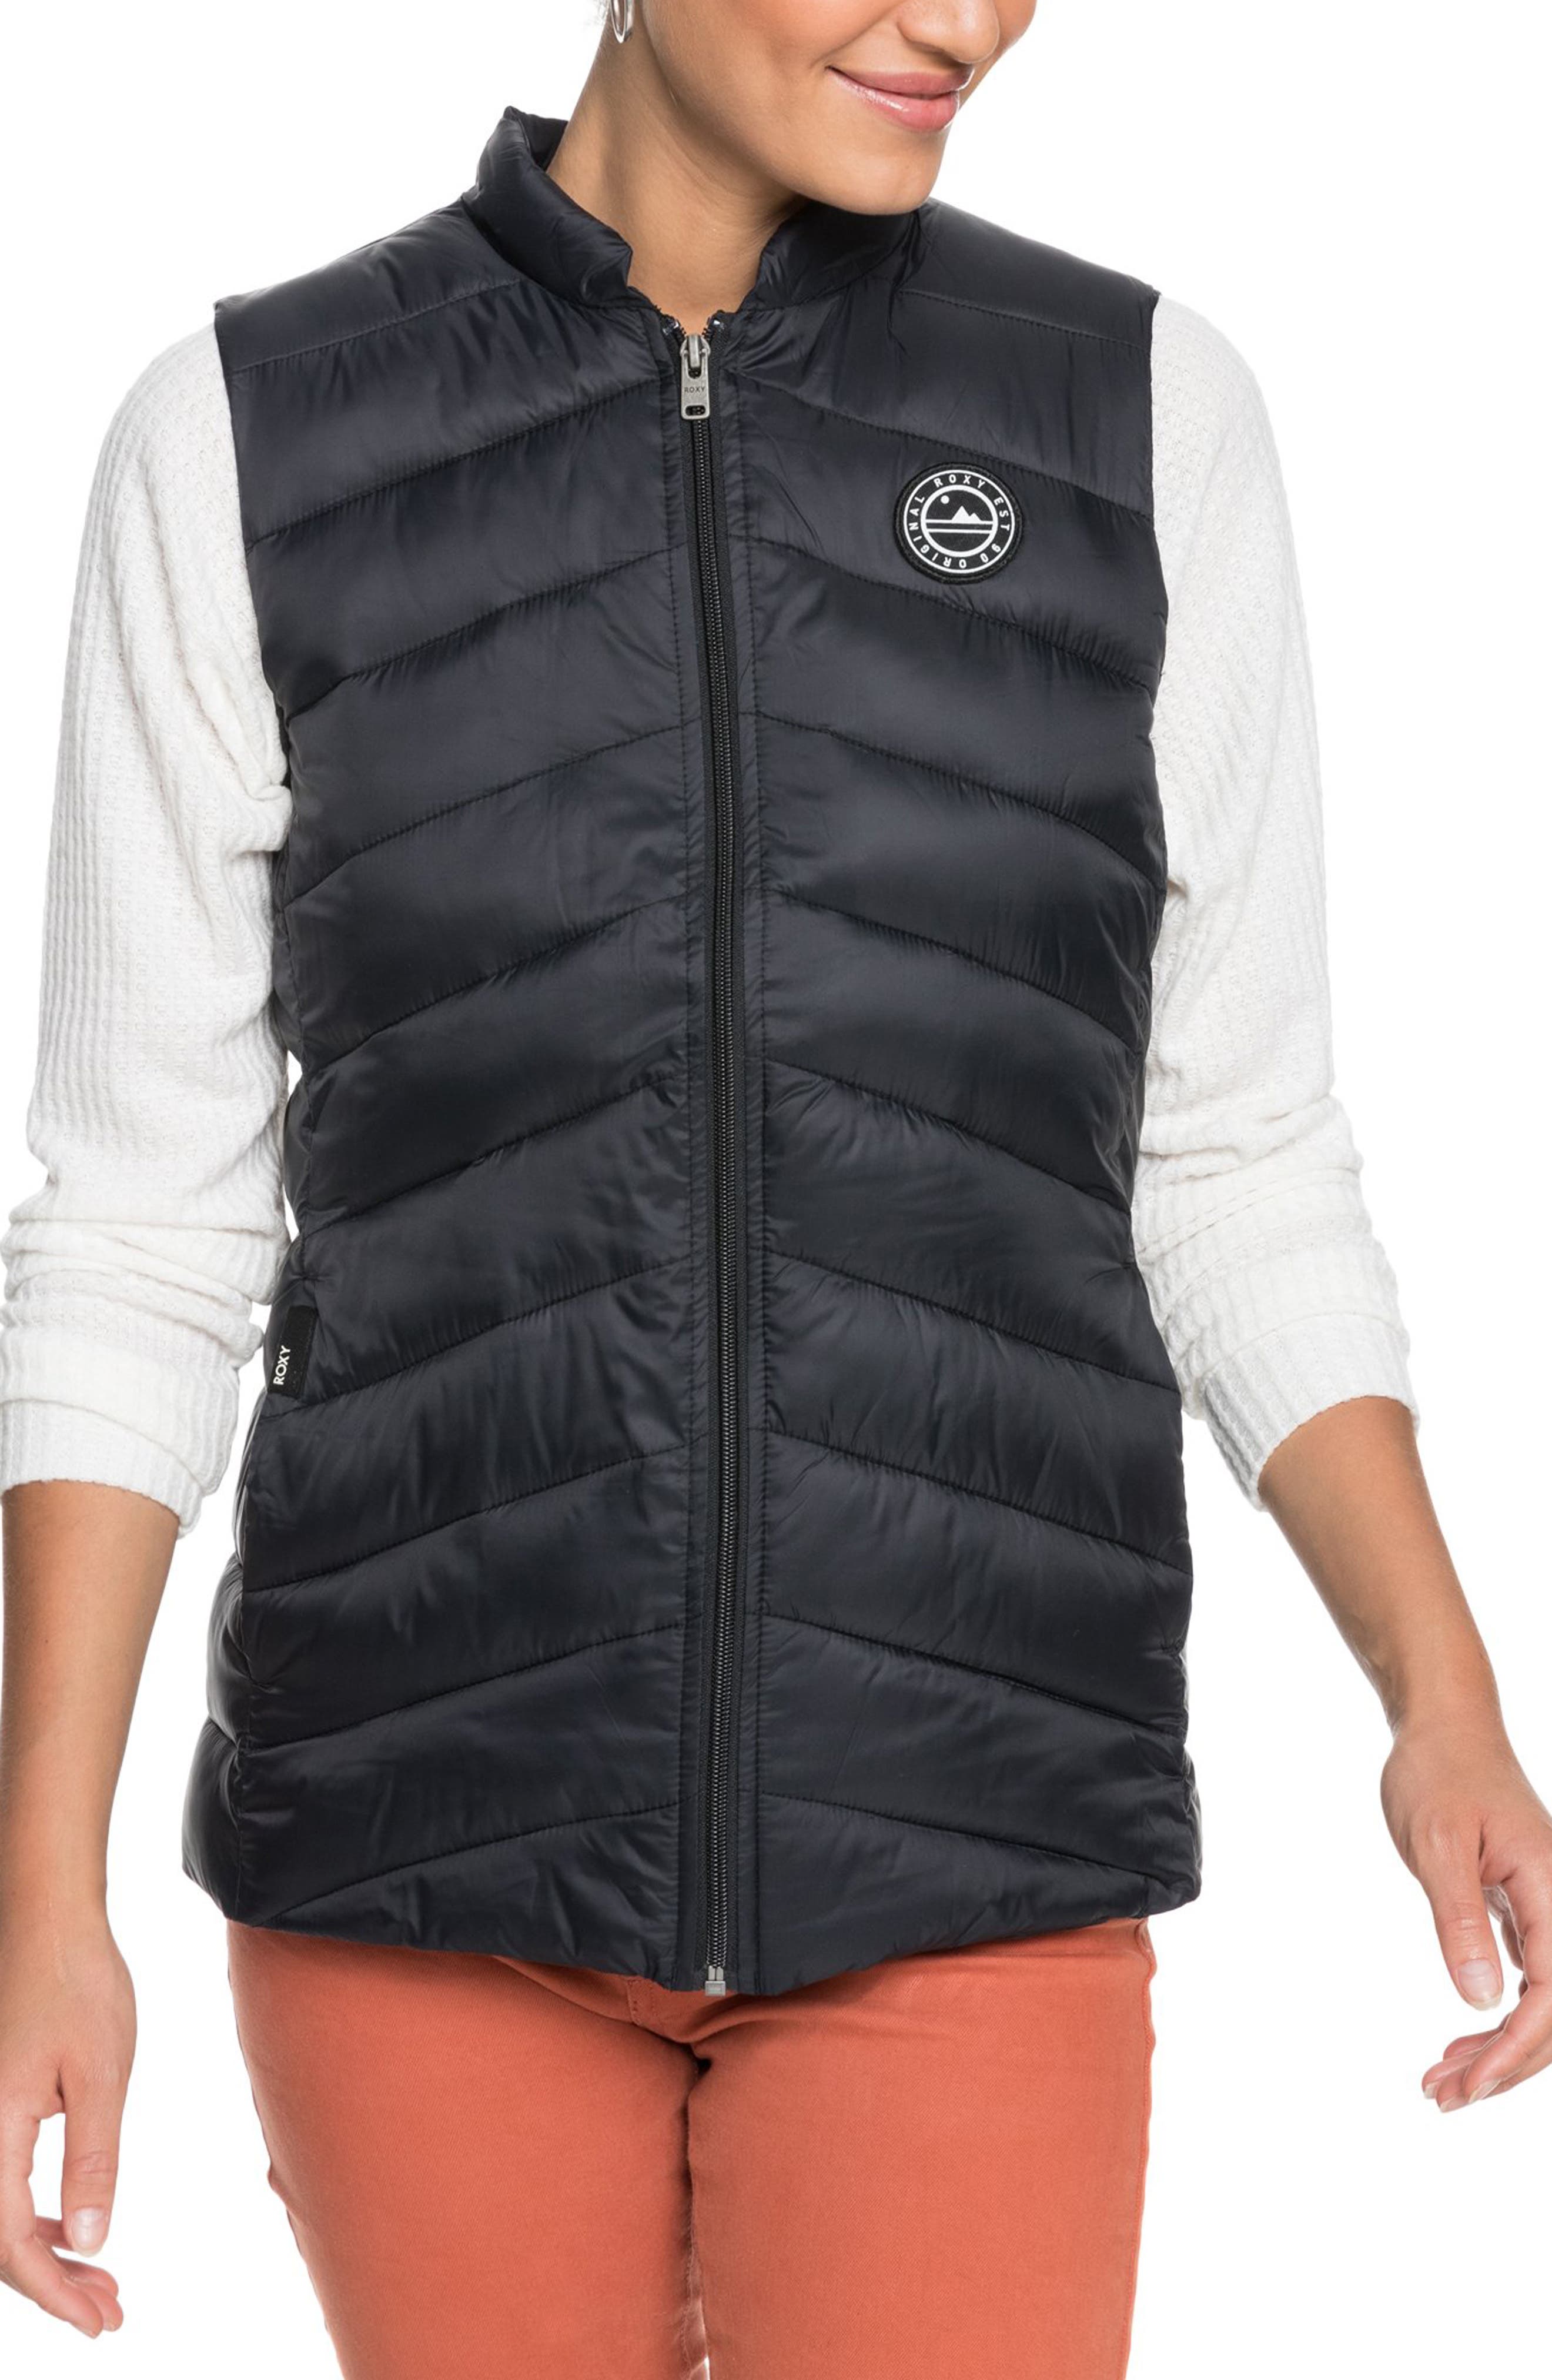 French Neck Vest FREE DELIVERY Long